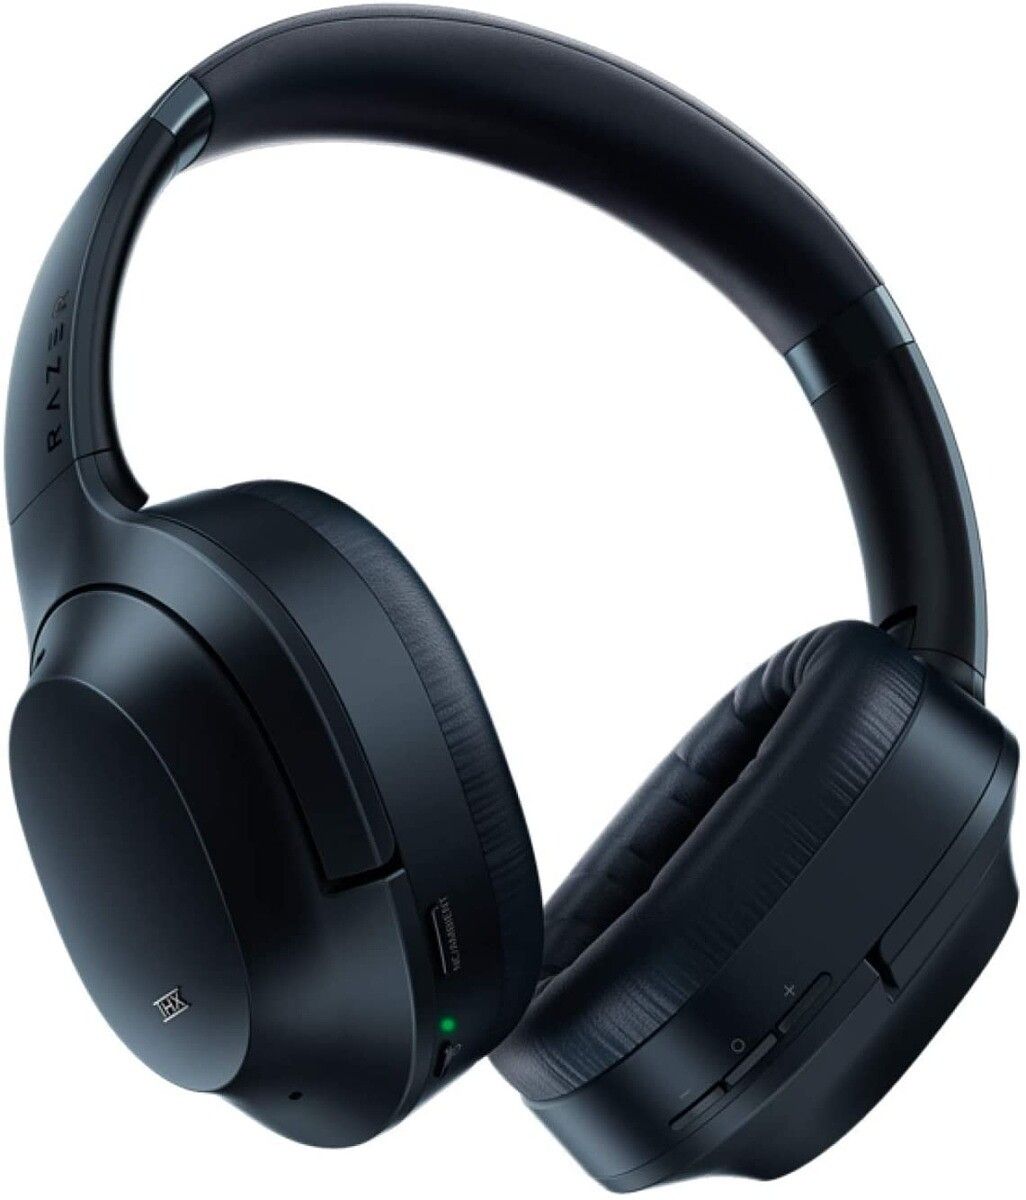 Save $50 on these mid-range headphones at Amazon! Available in Classic Black and Midnight Blue, you'll enjoy the ANC in these headphones without the heavy hit to your wallet.